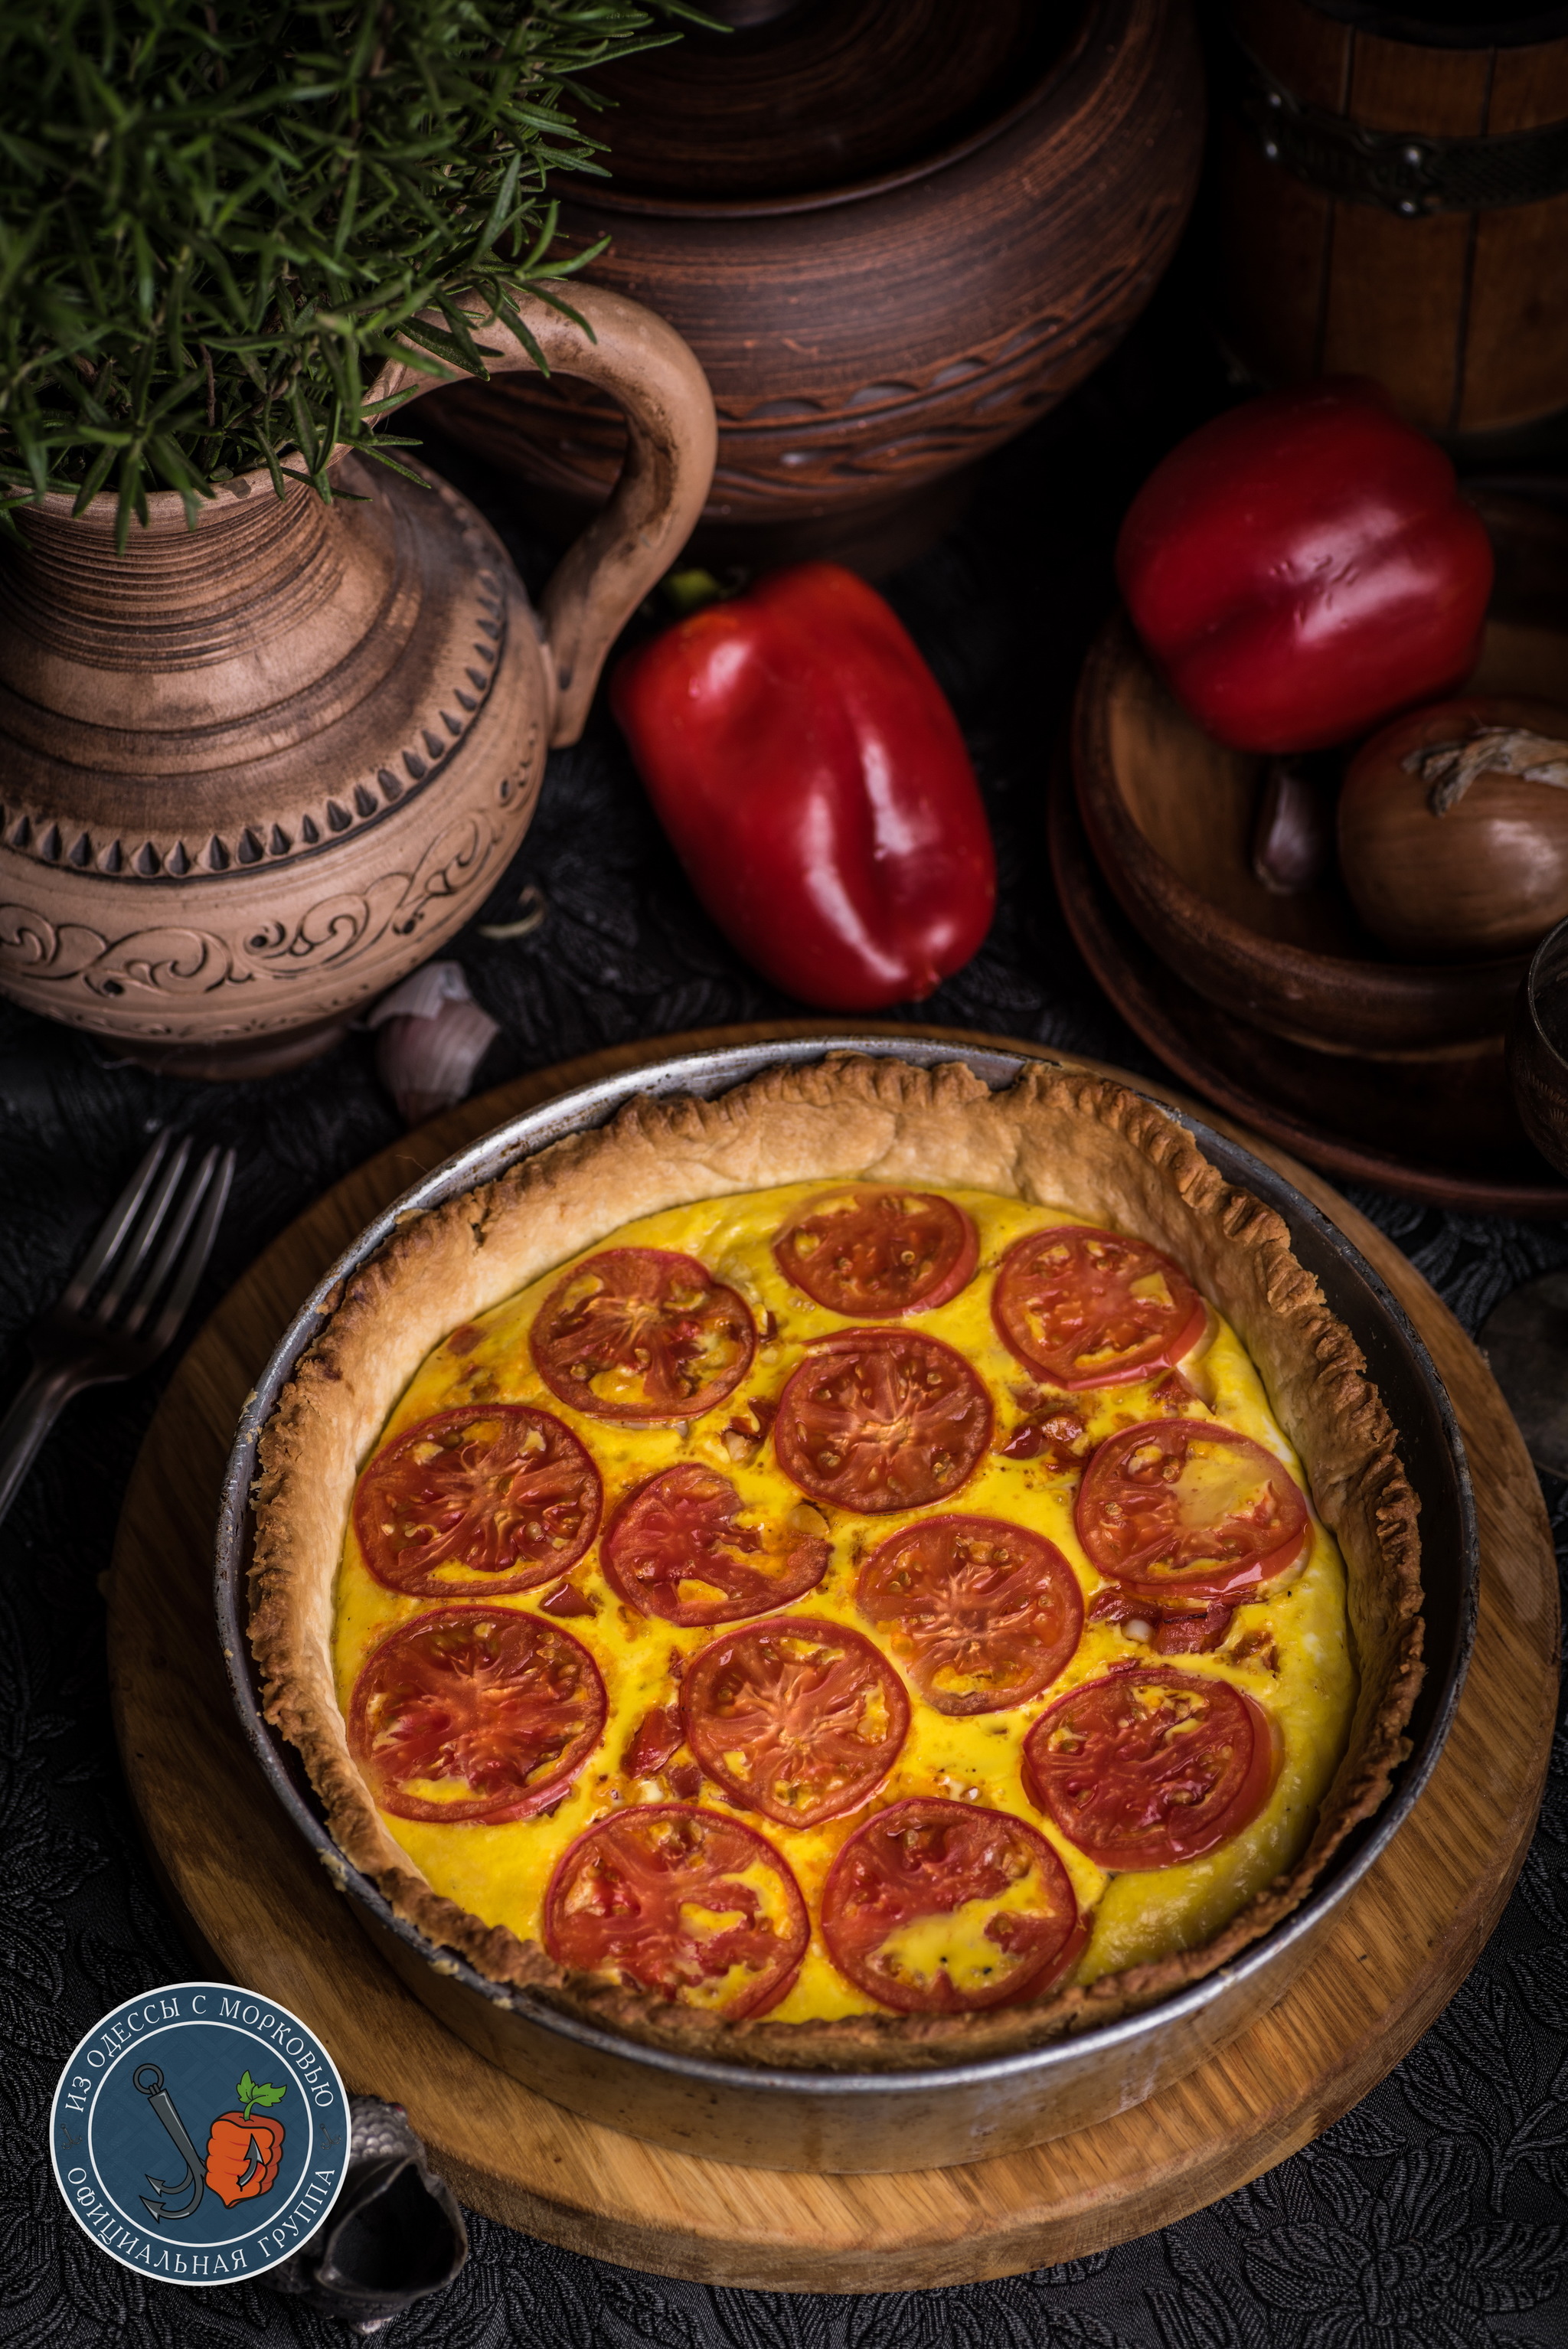 Quiche from Kwama eggs. - My, From Odessa with carrots, Literary Cuisine, The elder scrolls, Recipe, Cooking, Longpost, The photo, Food